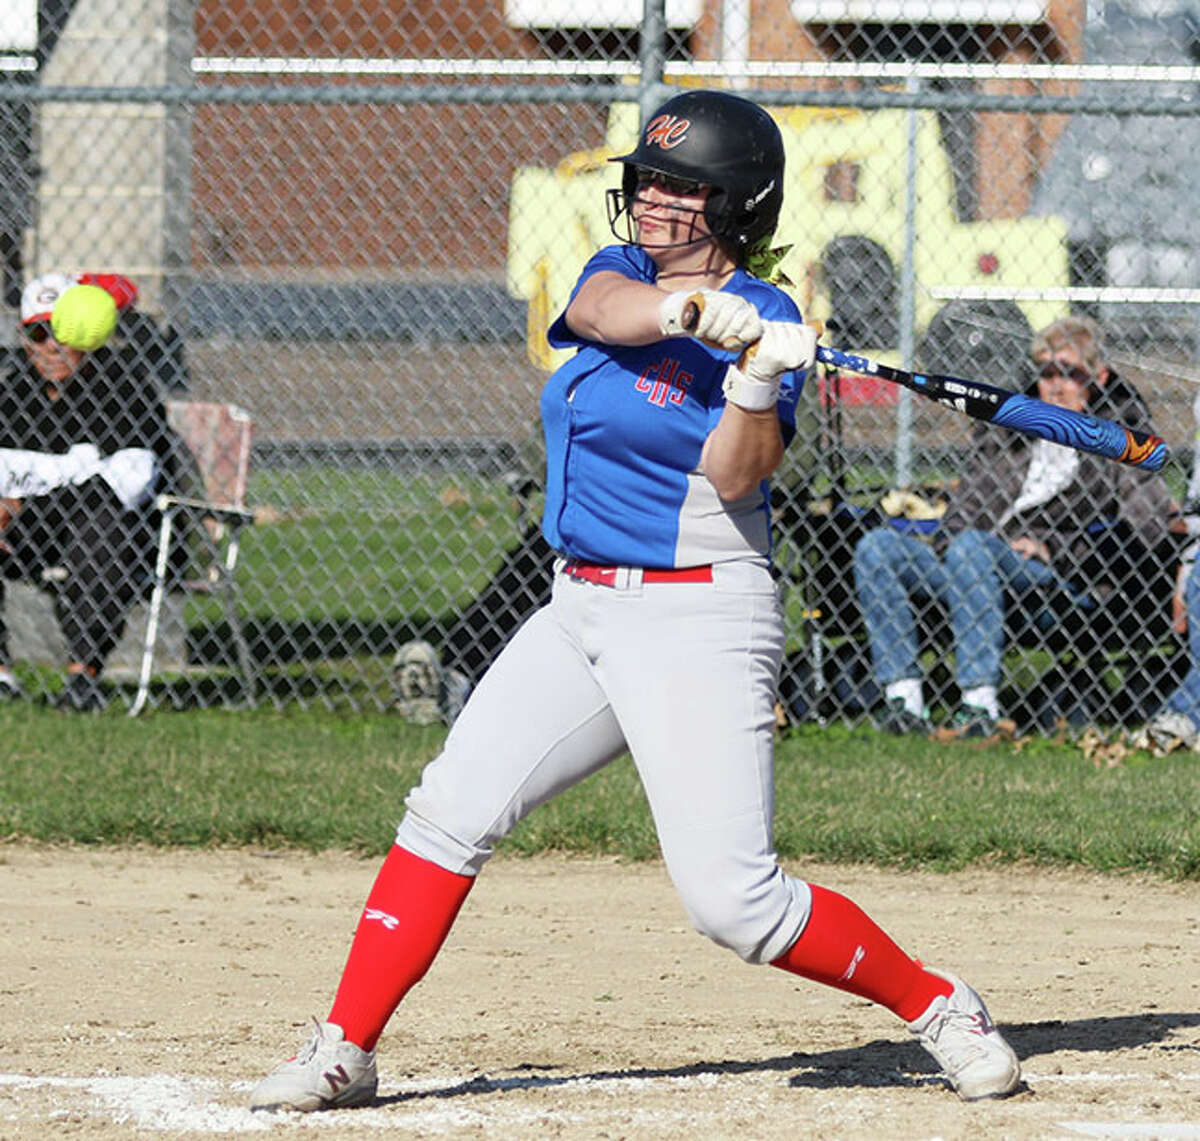 Carlinville's Isabella Tiburzi hits a double against Staunton on Monday at Staunton. Later in the 10th inning, Tiburzi hit a game-winning homer for the Cavaliers.